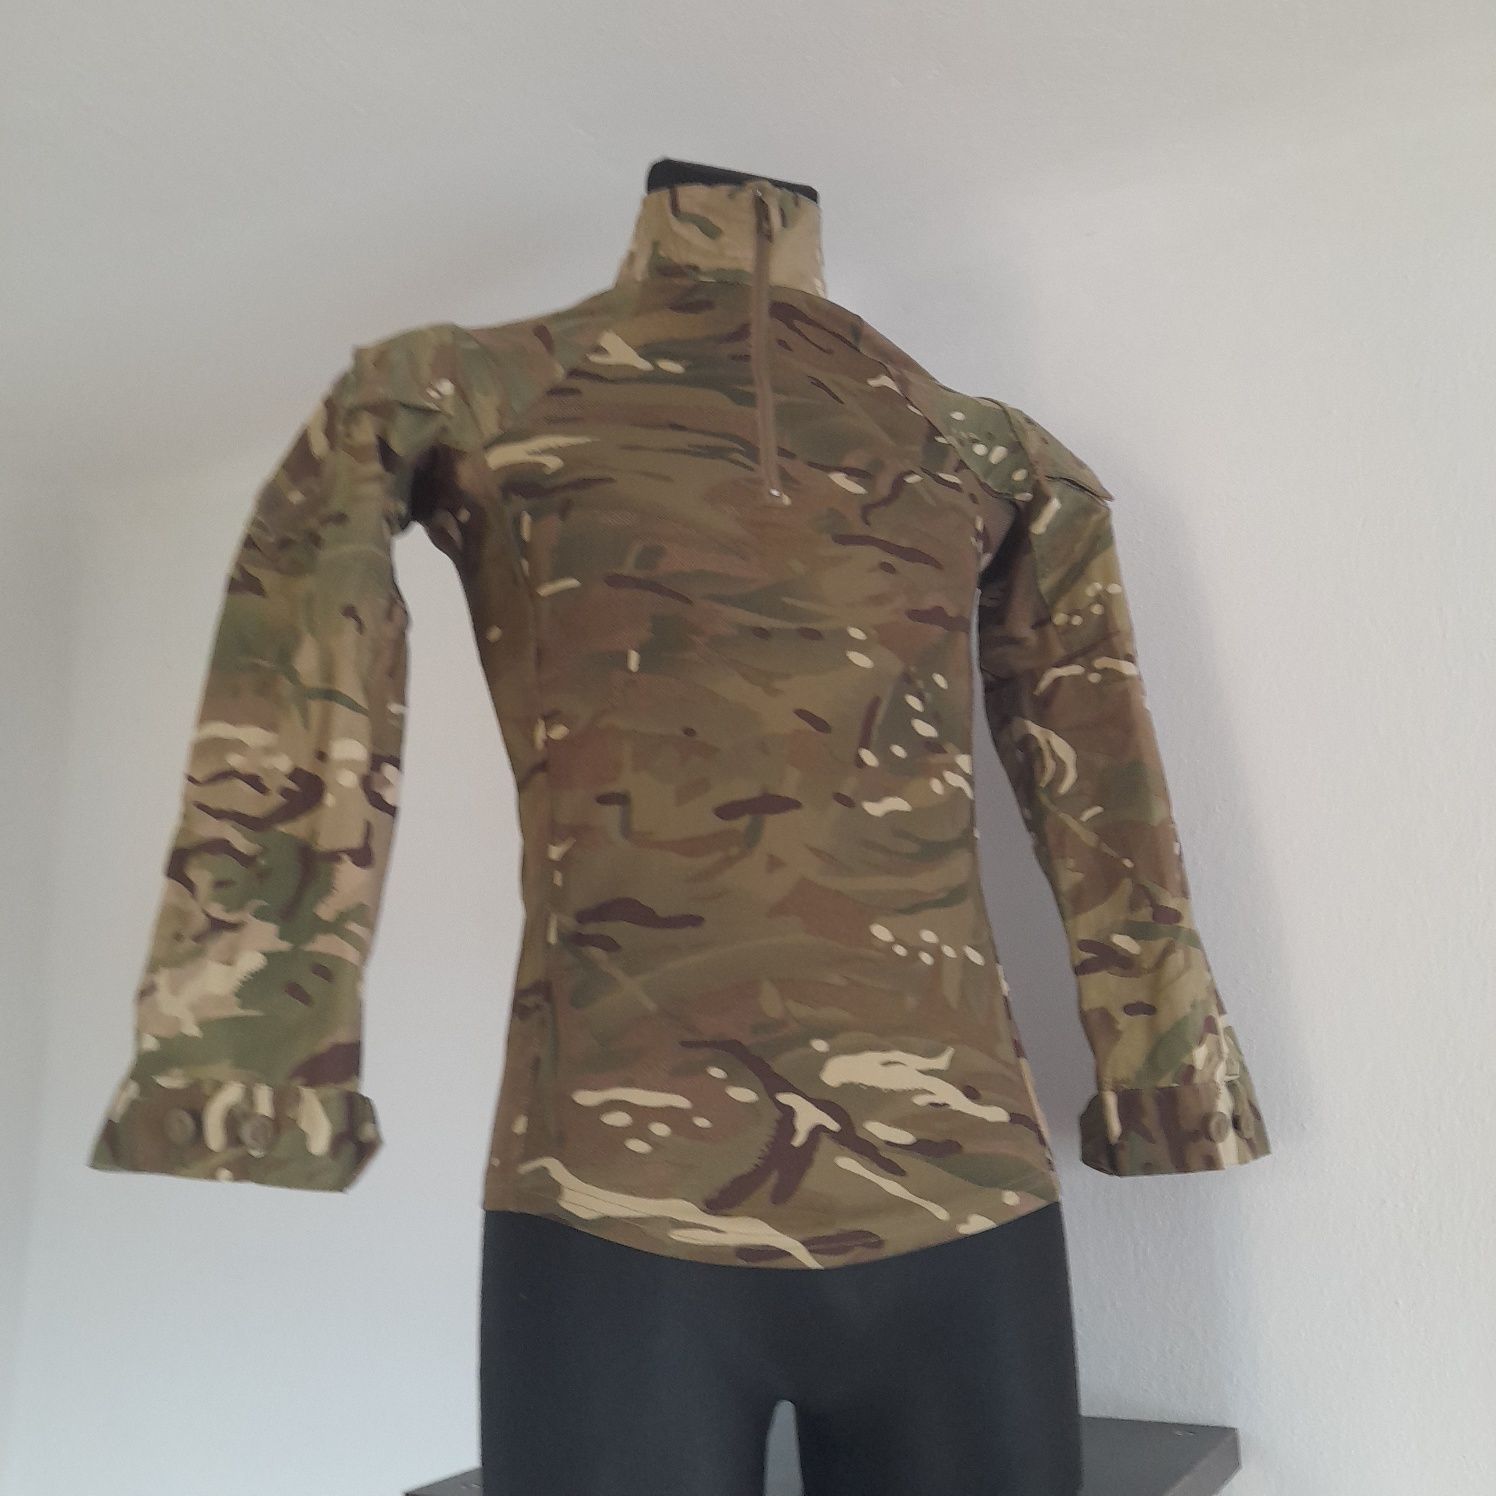 Shirt Under Body Armour EP MTP 160/80(S)